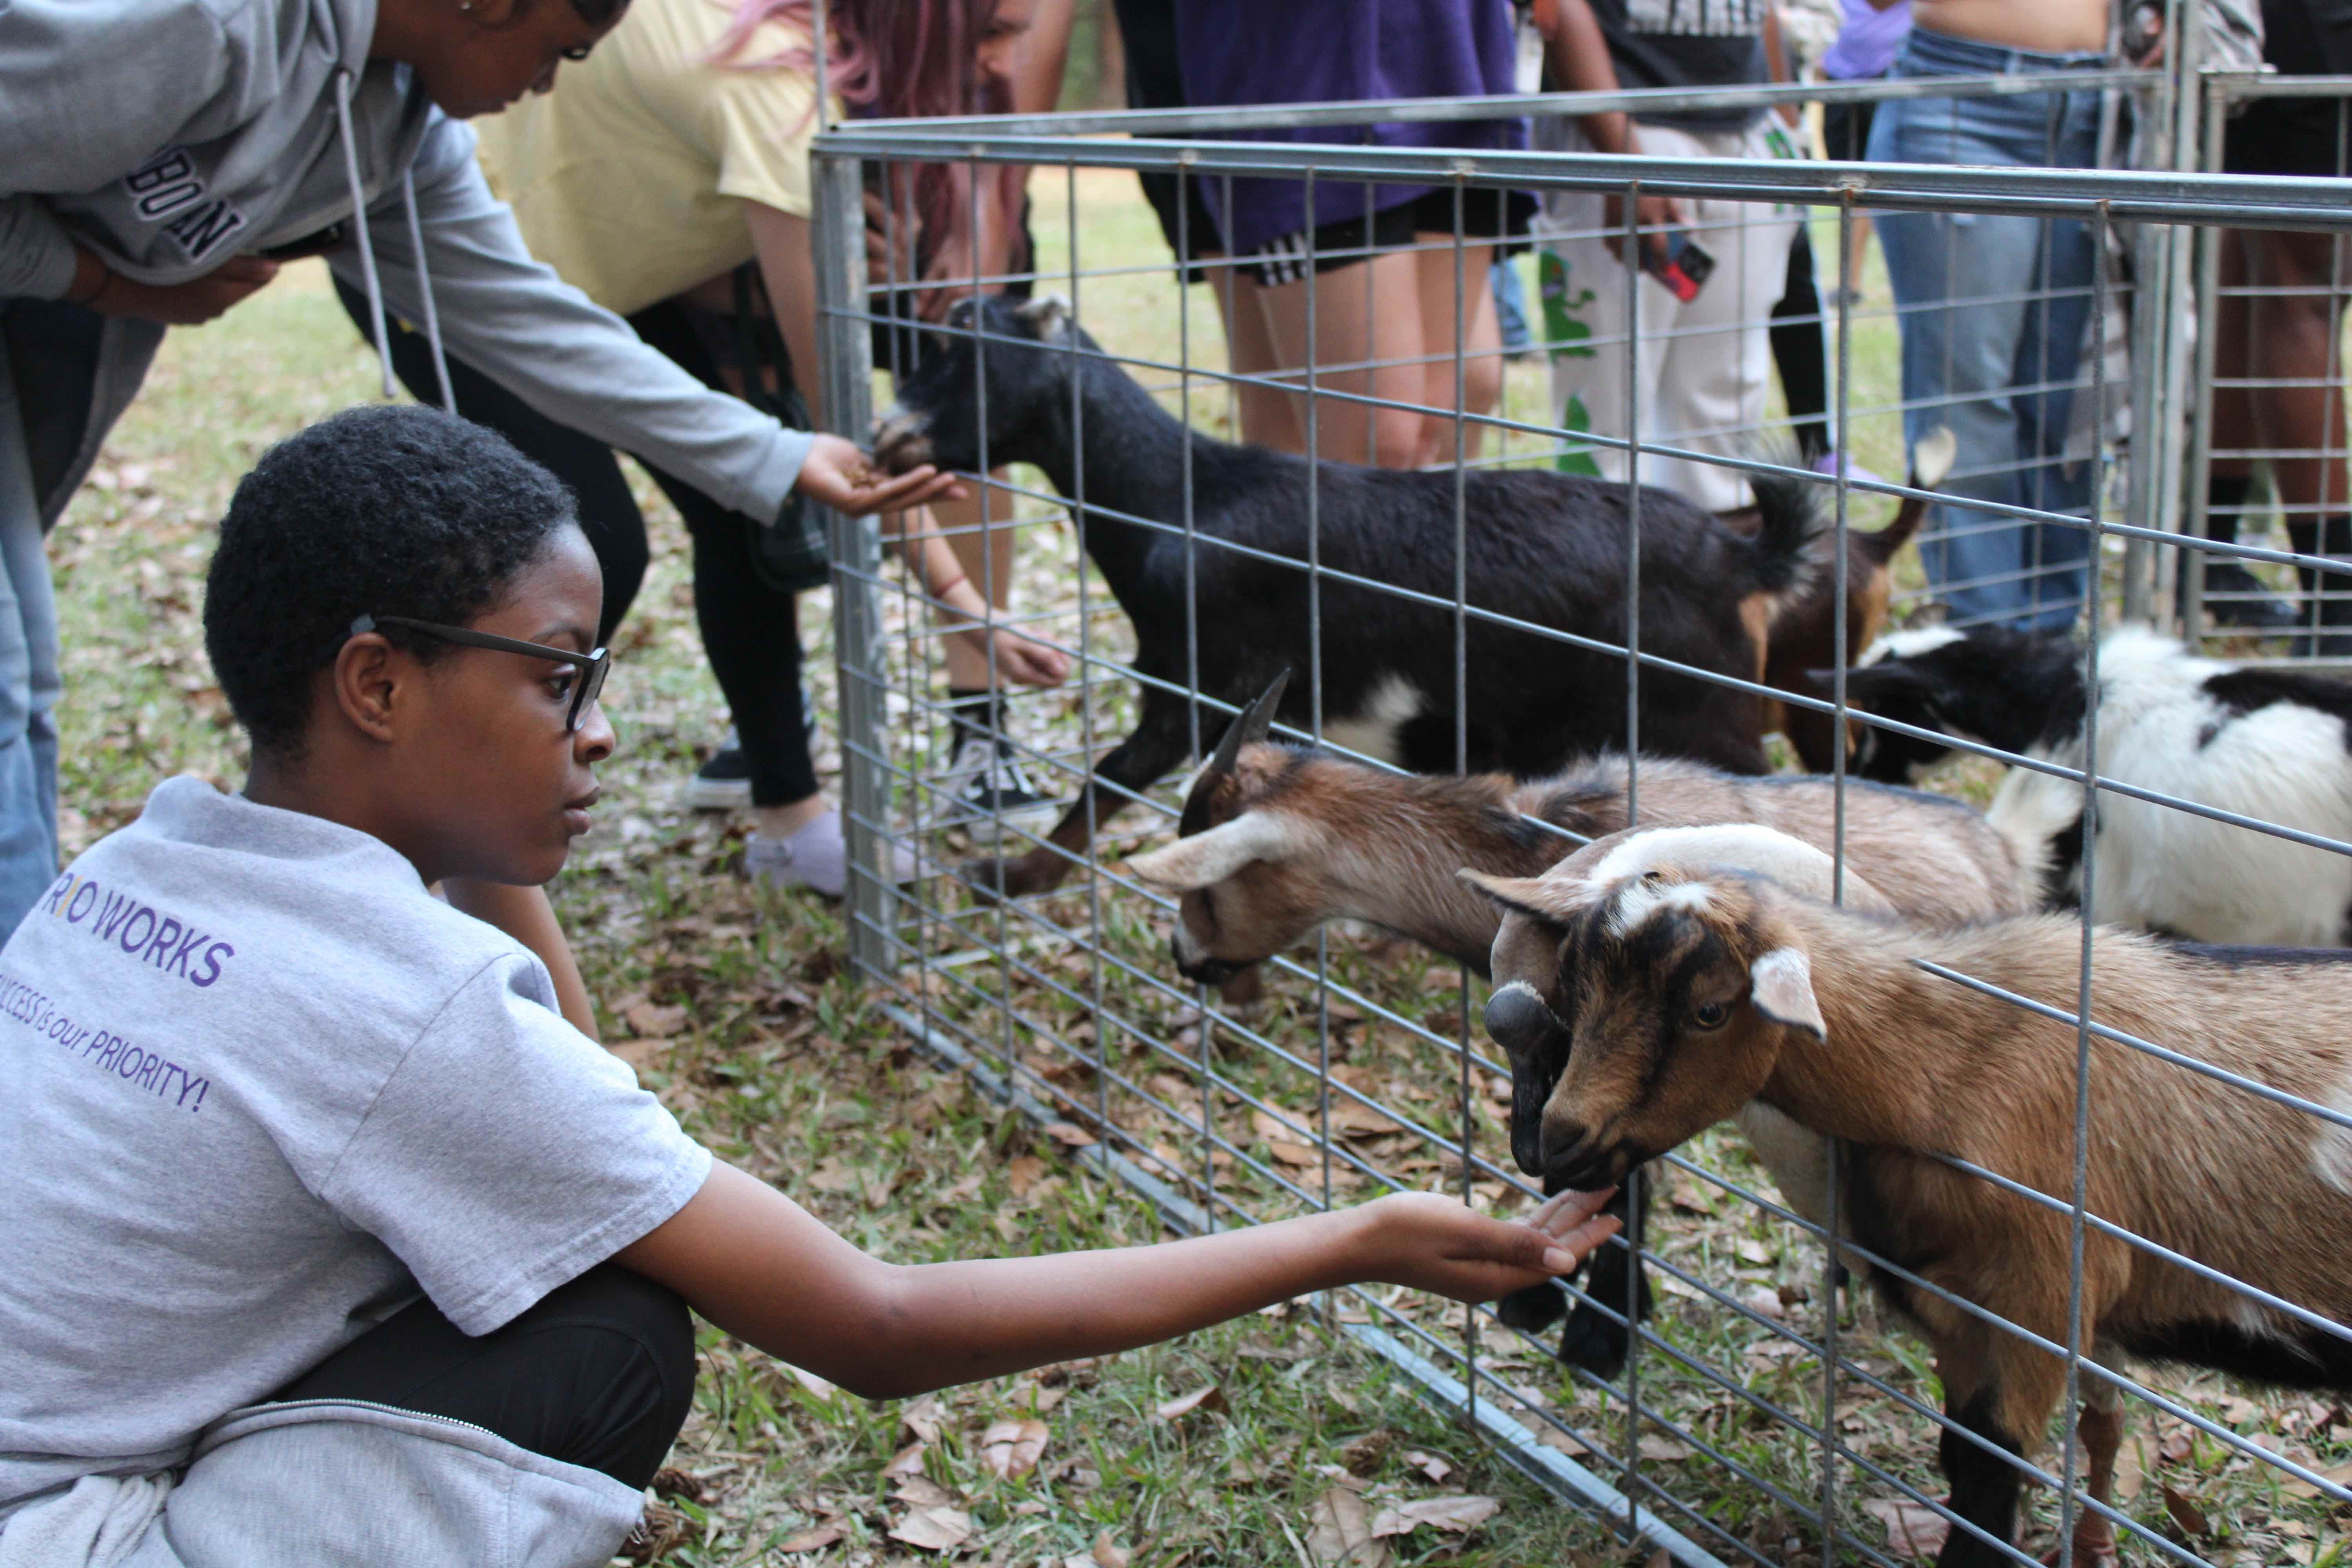 Student feeding a goat at an Acadian Hall event.